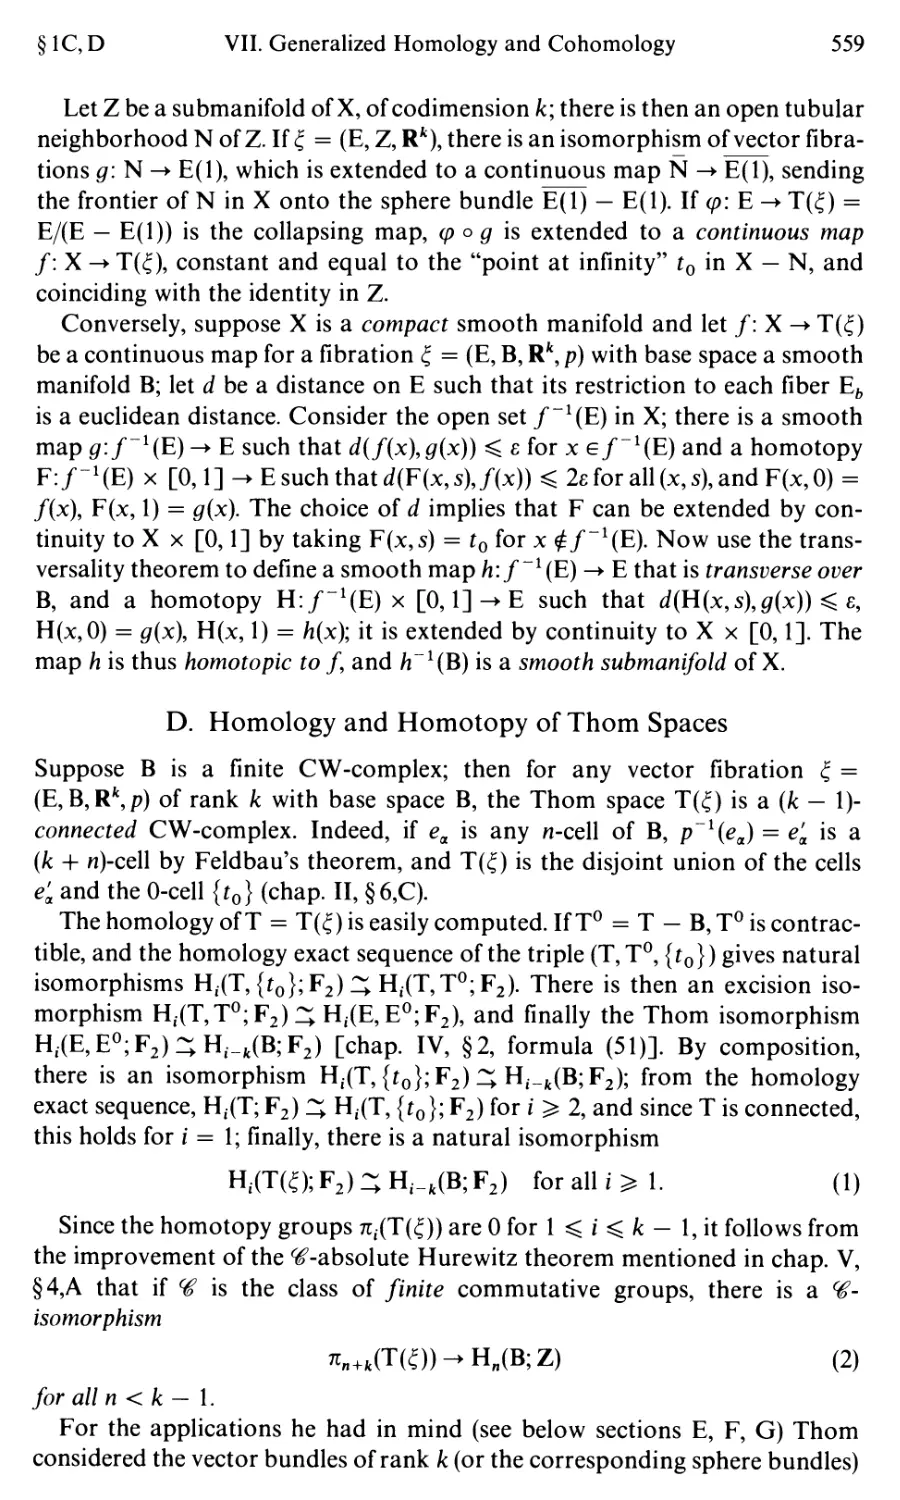 D. Homology and Homotopy of Thorn Spaces